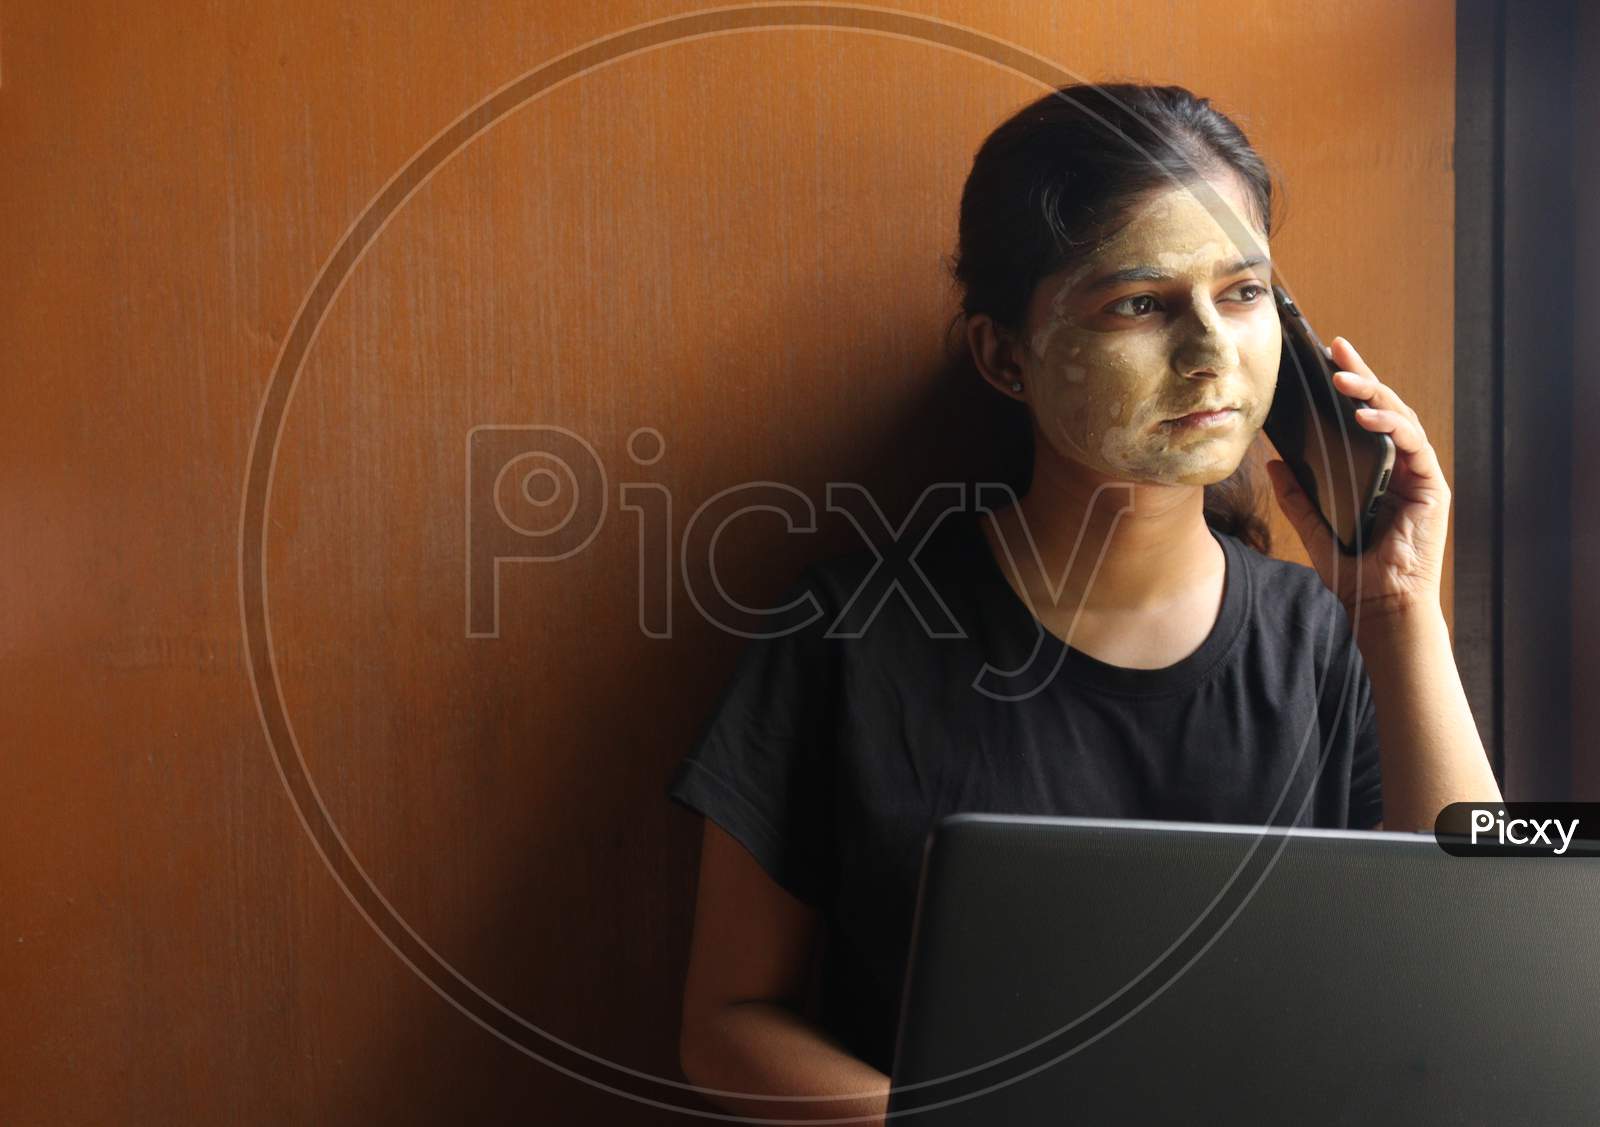 women working on laptop and applying face pack